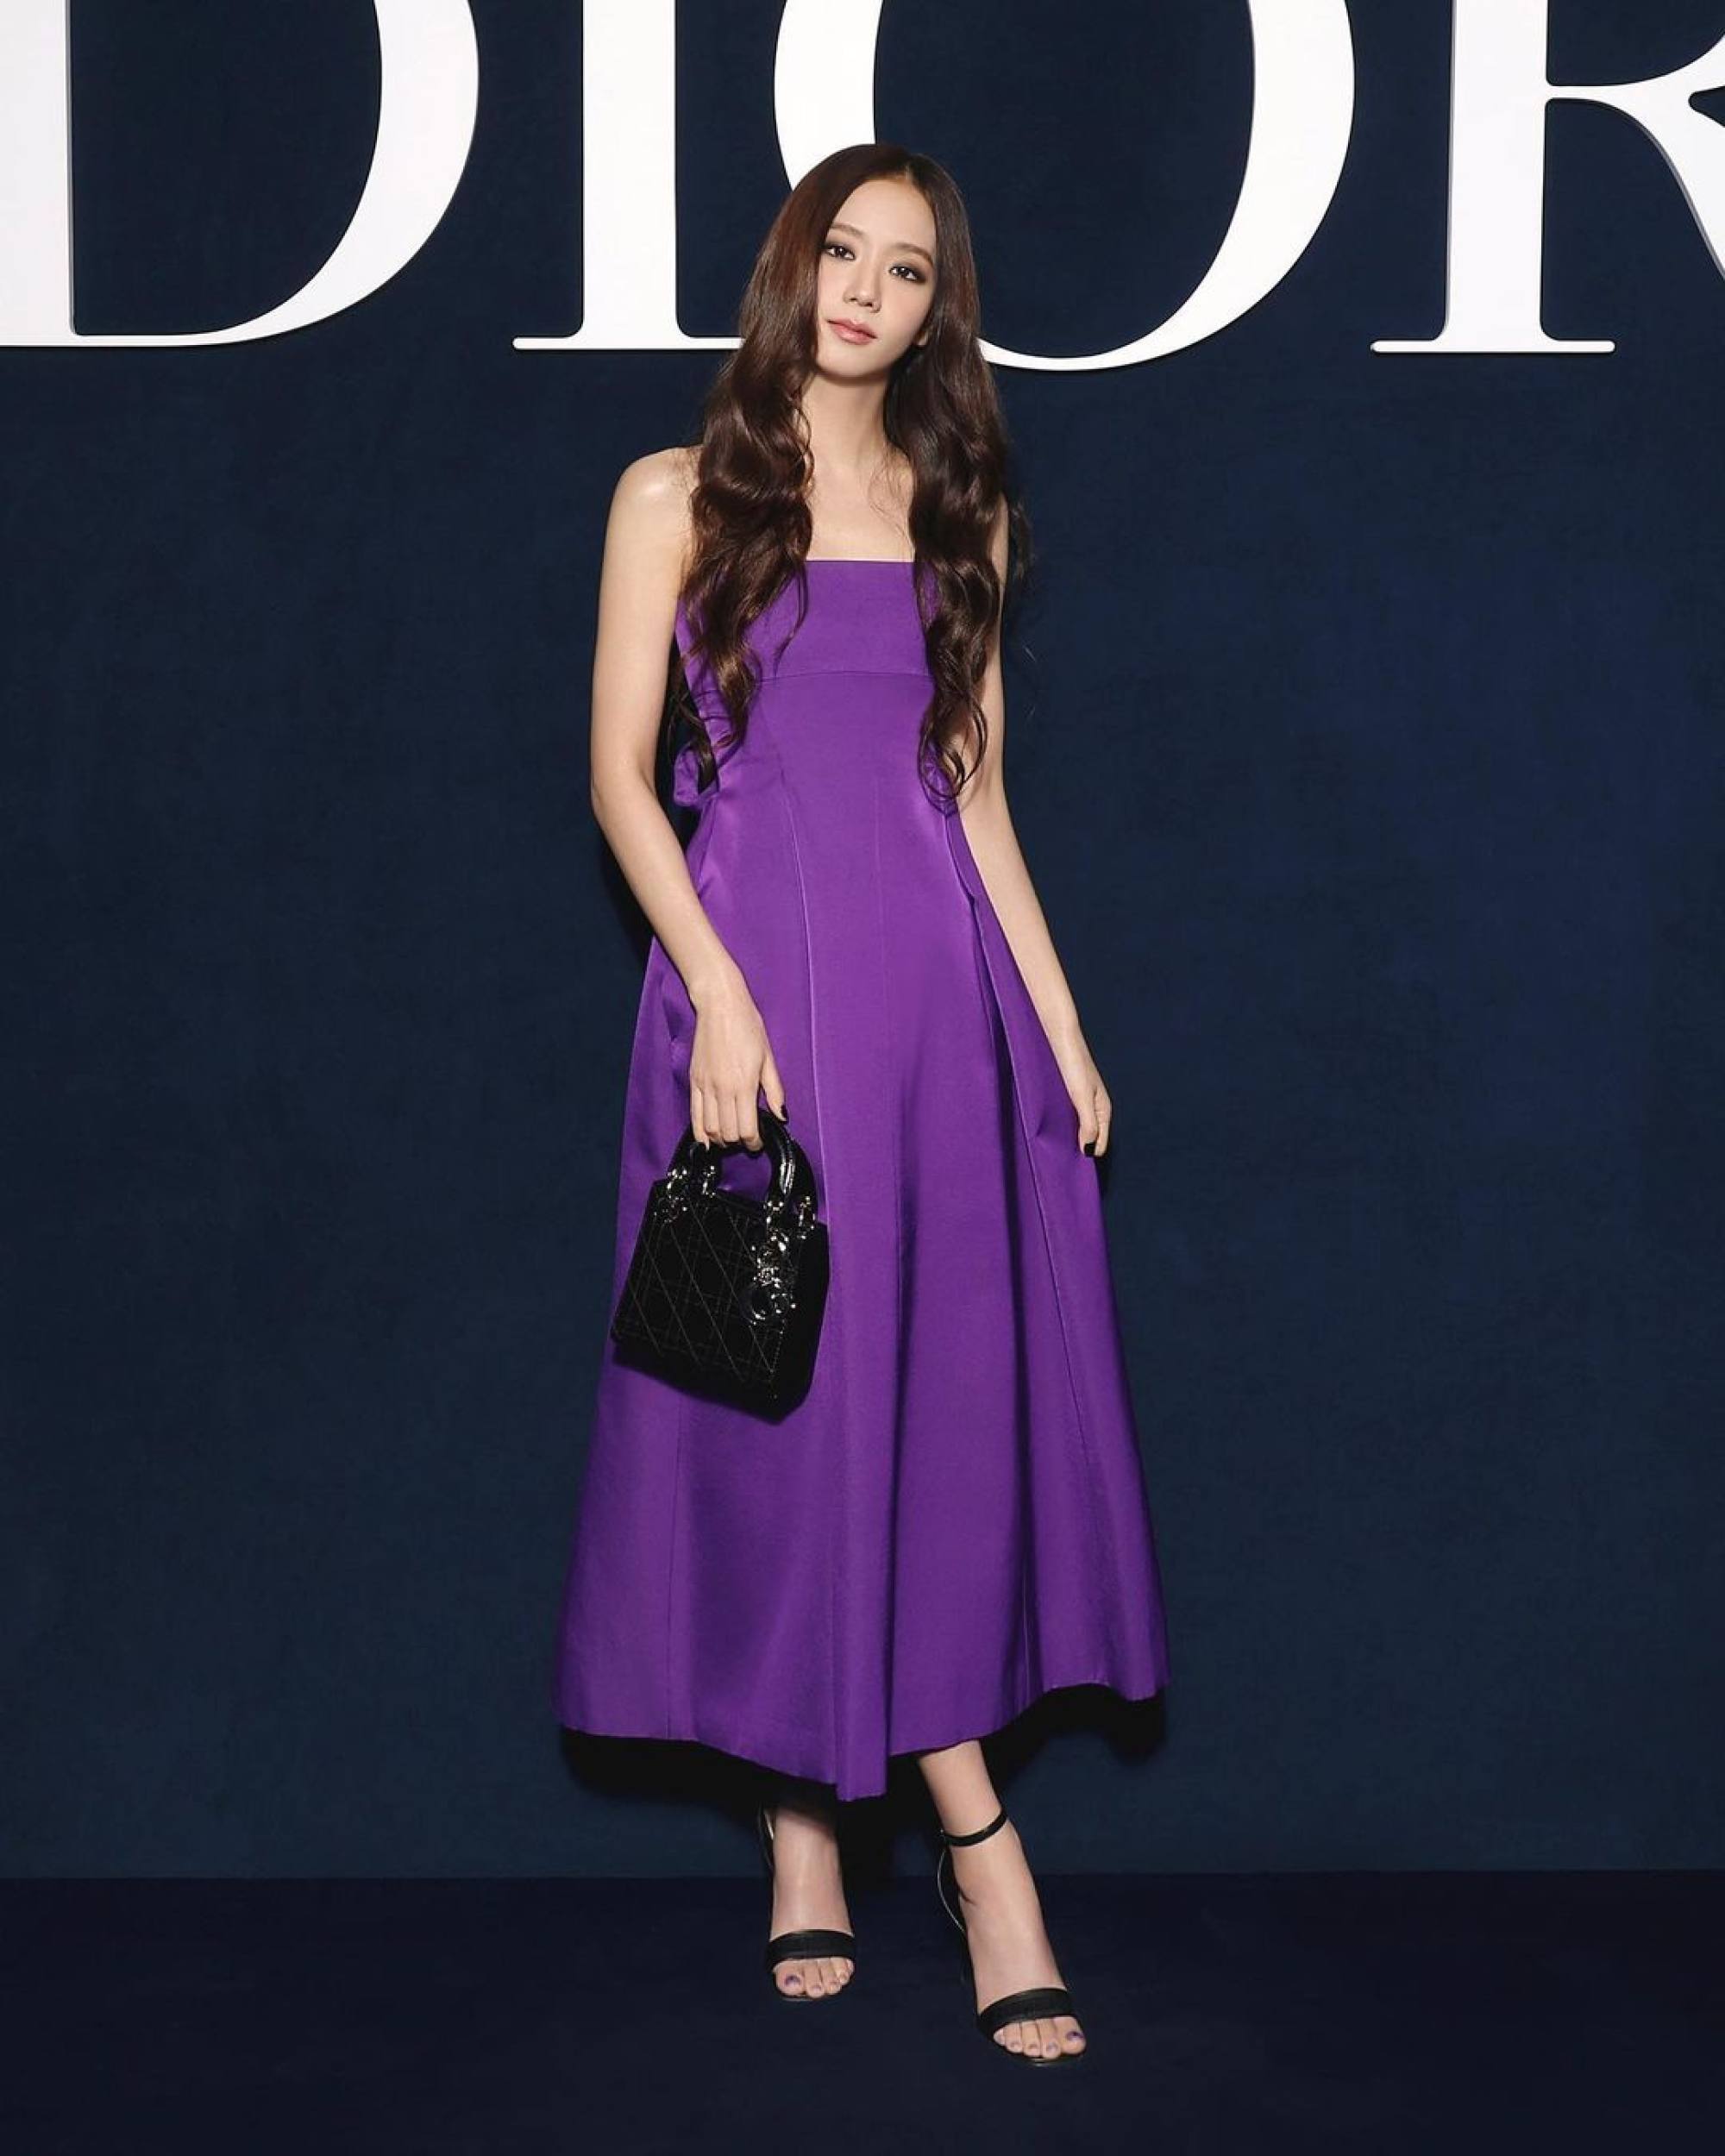 Dior on Twitter Continuing our StarsinDior coverage JISOO Dior global  ambassador for fashion and beauty was at this afternoons DiorAW22 show  from Maria Grazia Chiuri httpstcoDlrn3eGdMo wearing a DiorFall22  plaid dress with